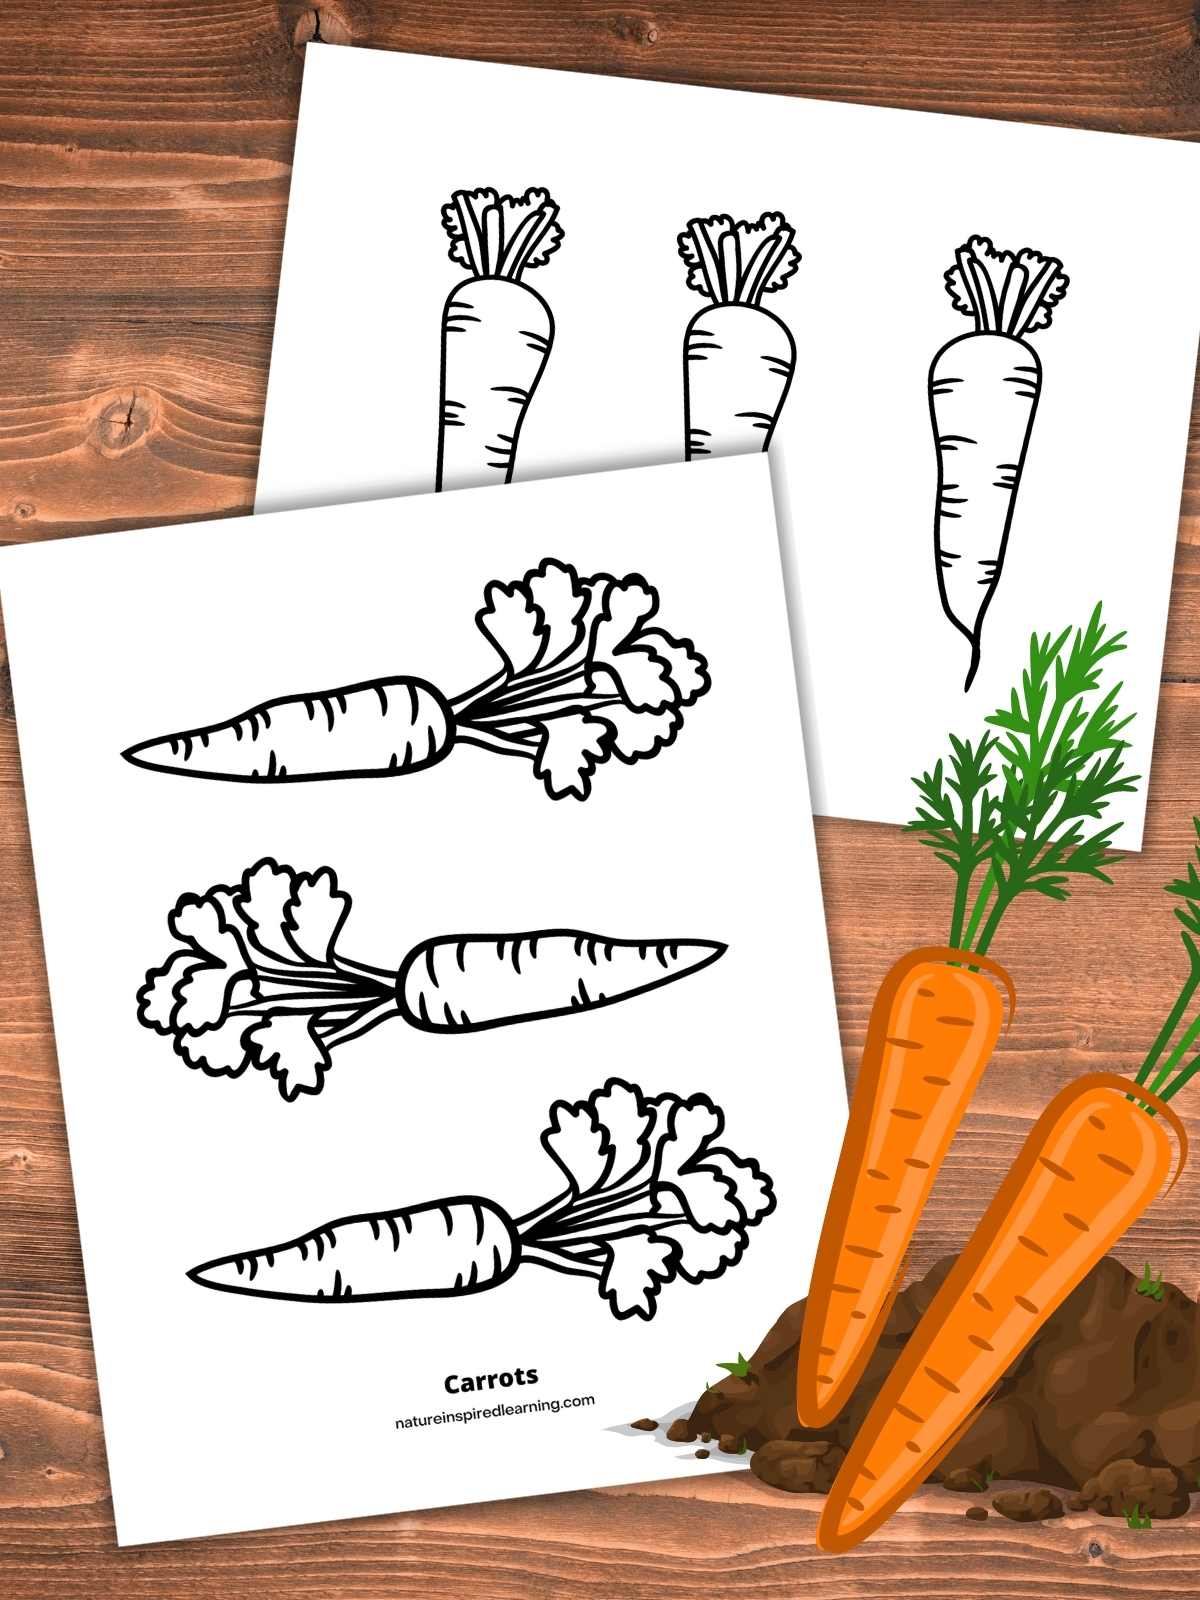 Carrot Pen Cartoon Illustration PNG Images | PSD Free Download - Pikbest